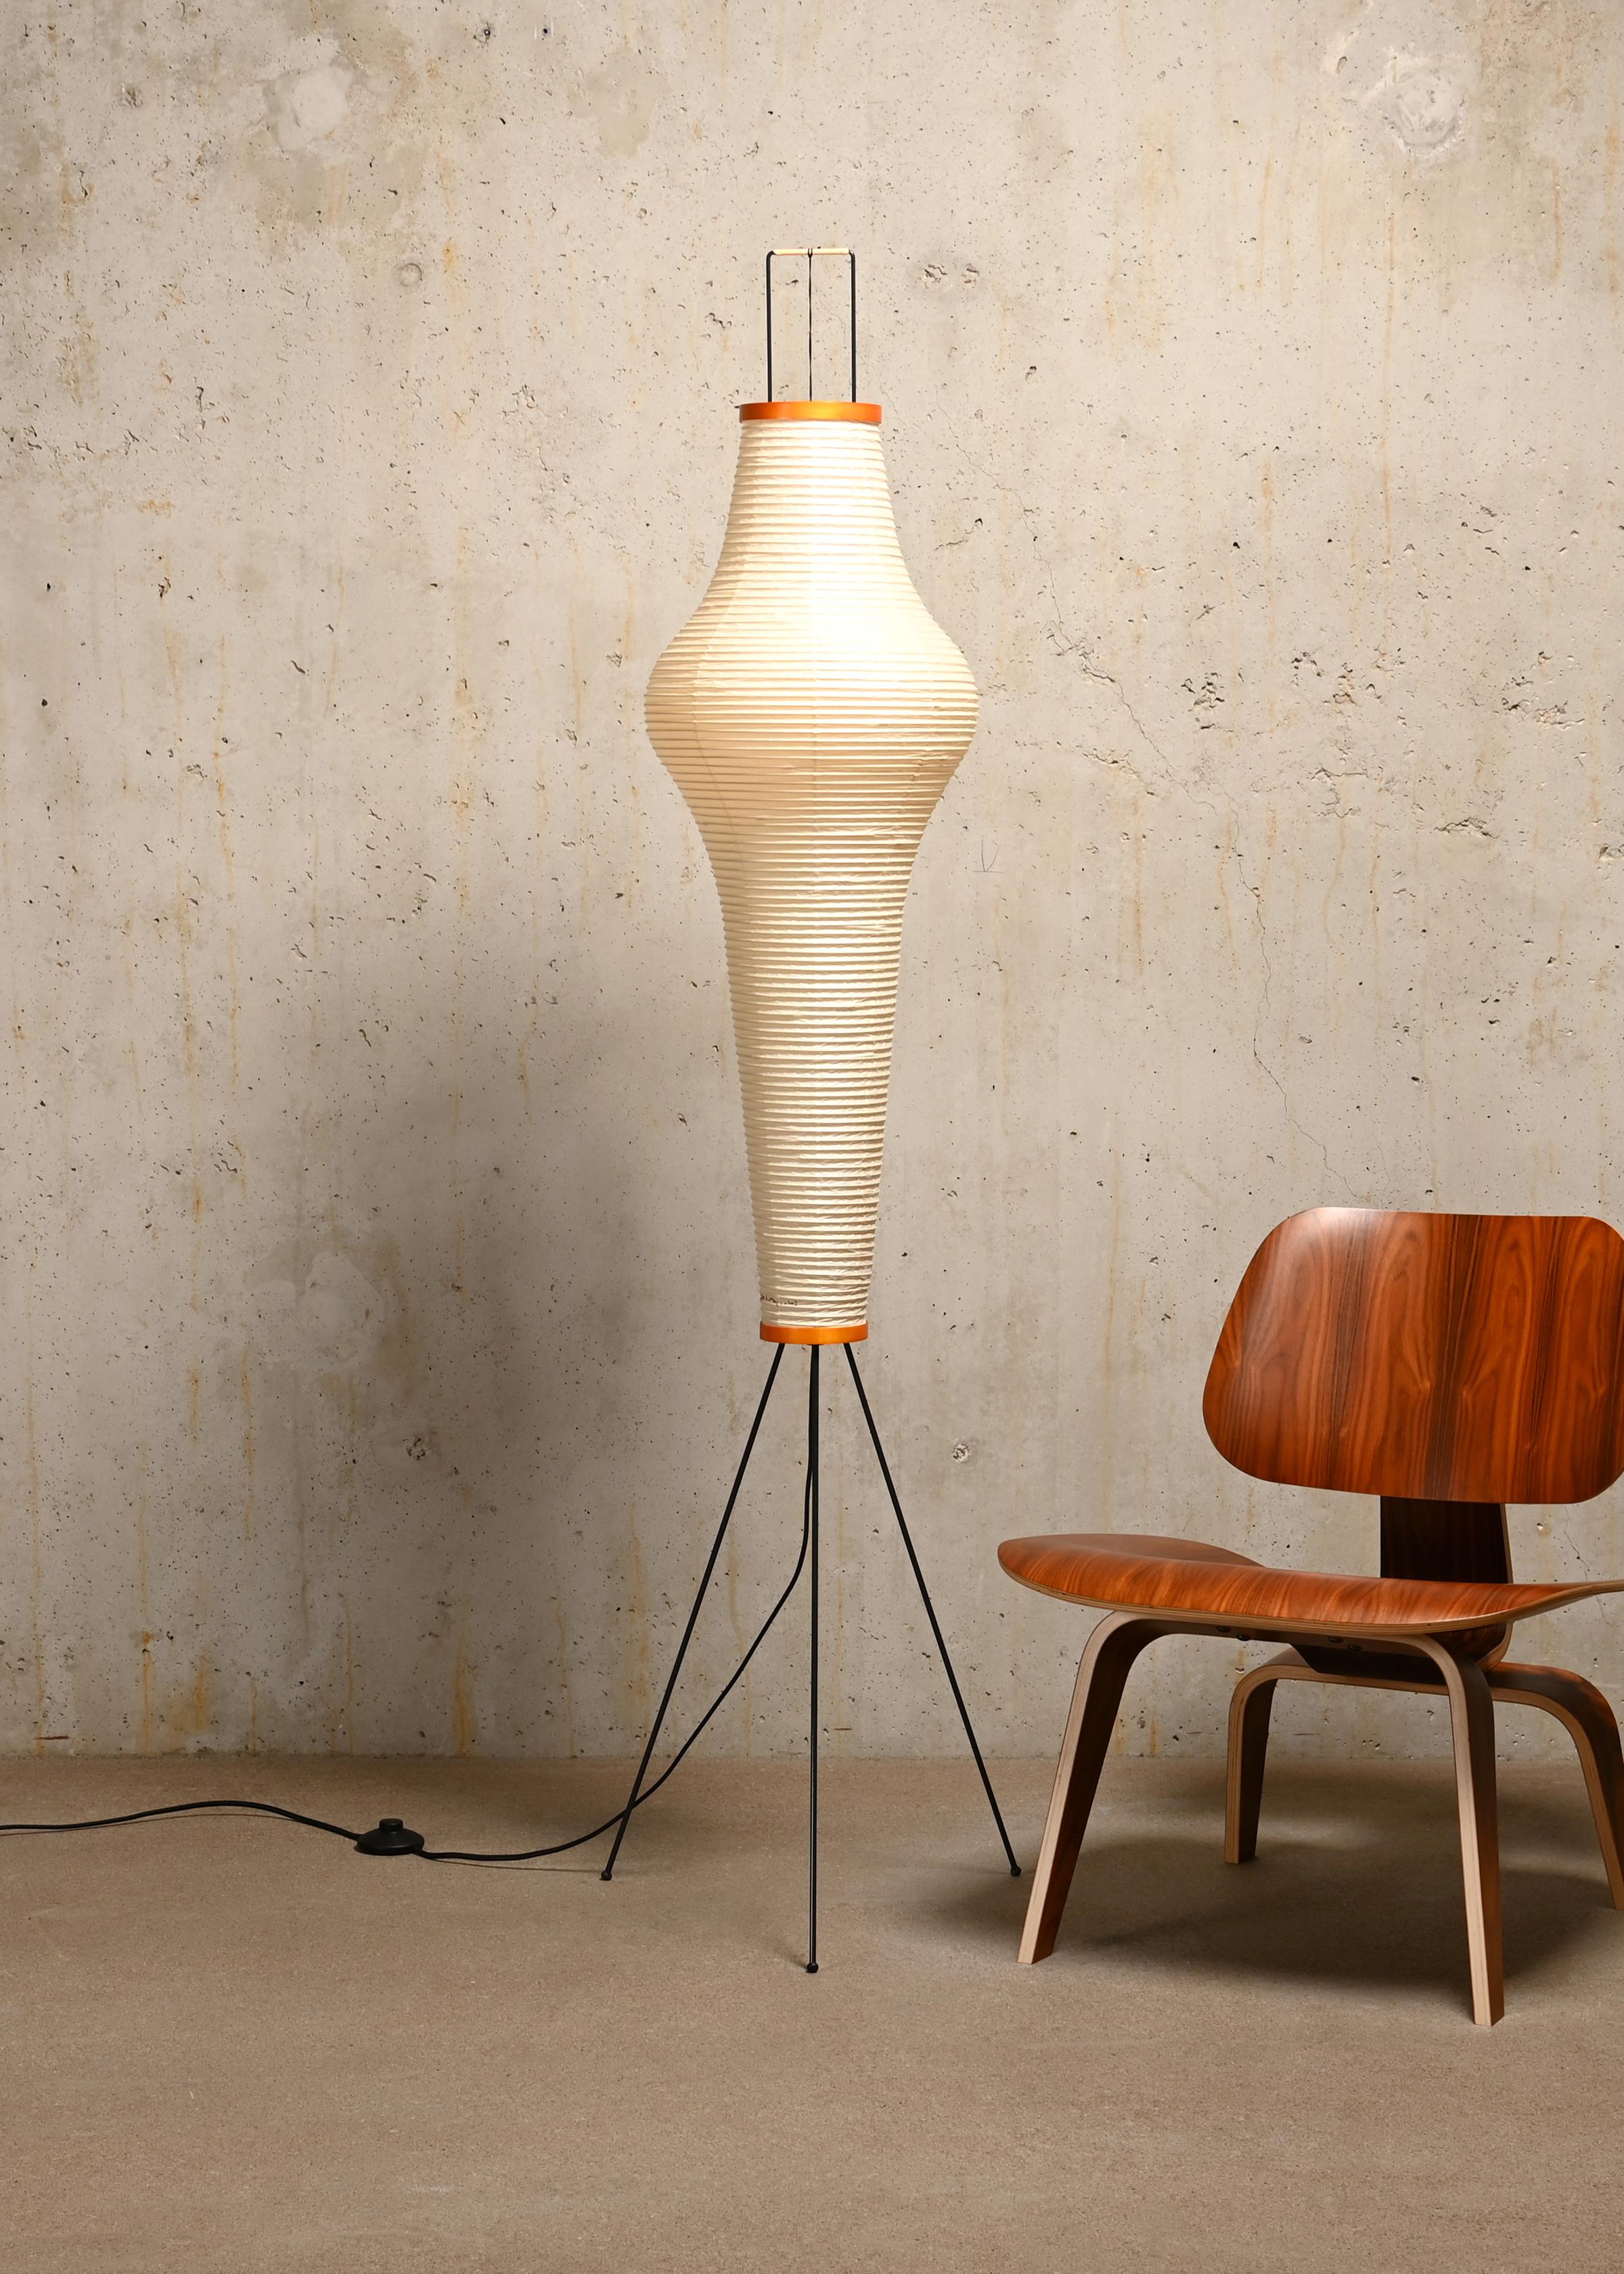 Japanese Isamu Noguchi Akari Model 14A Light Sculpture in Washi Paper and Bamboo by Ozeki For Sale